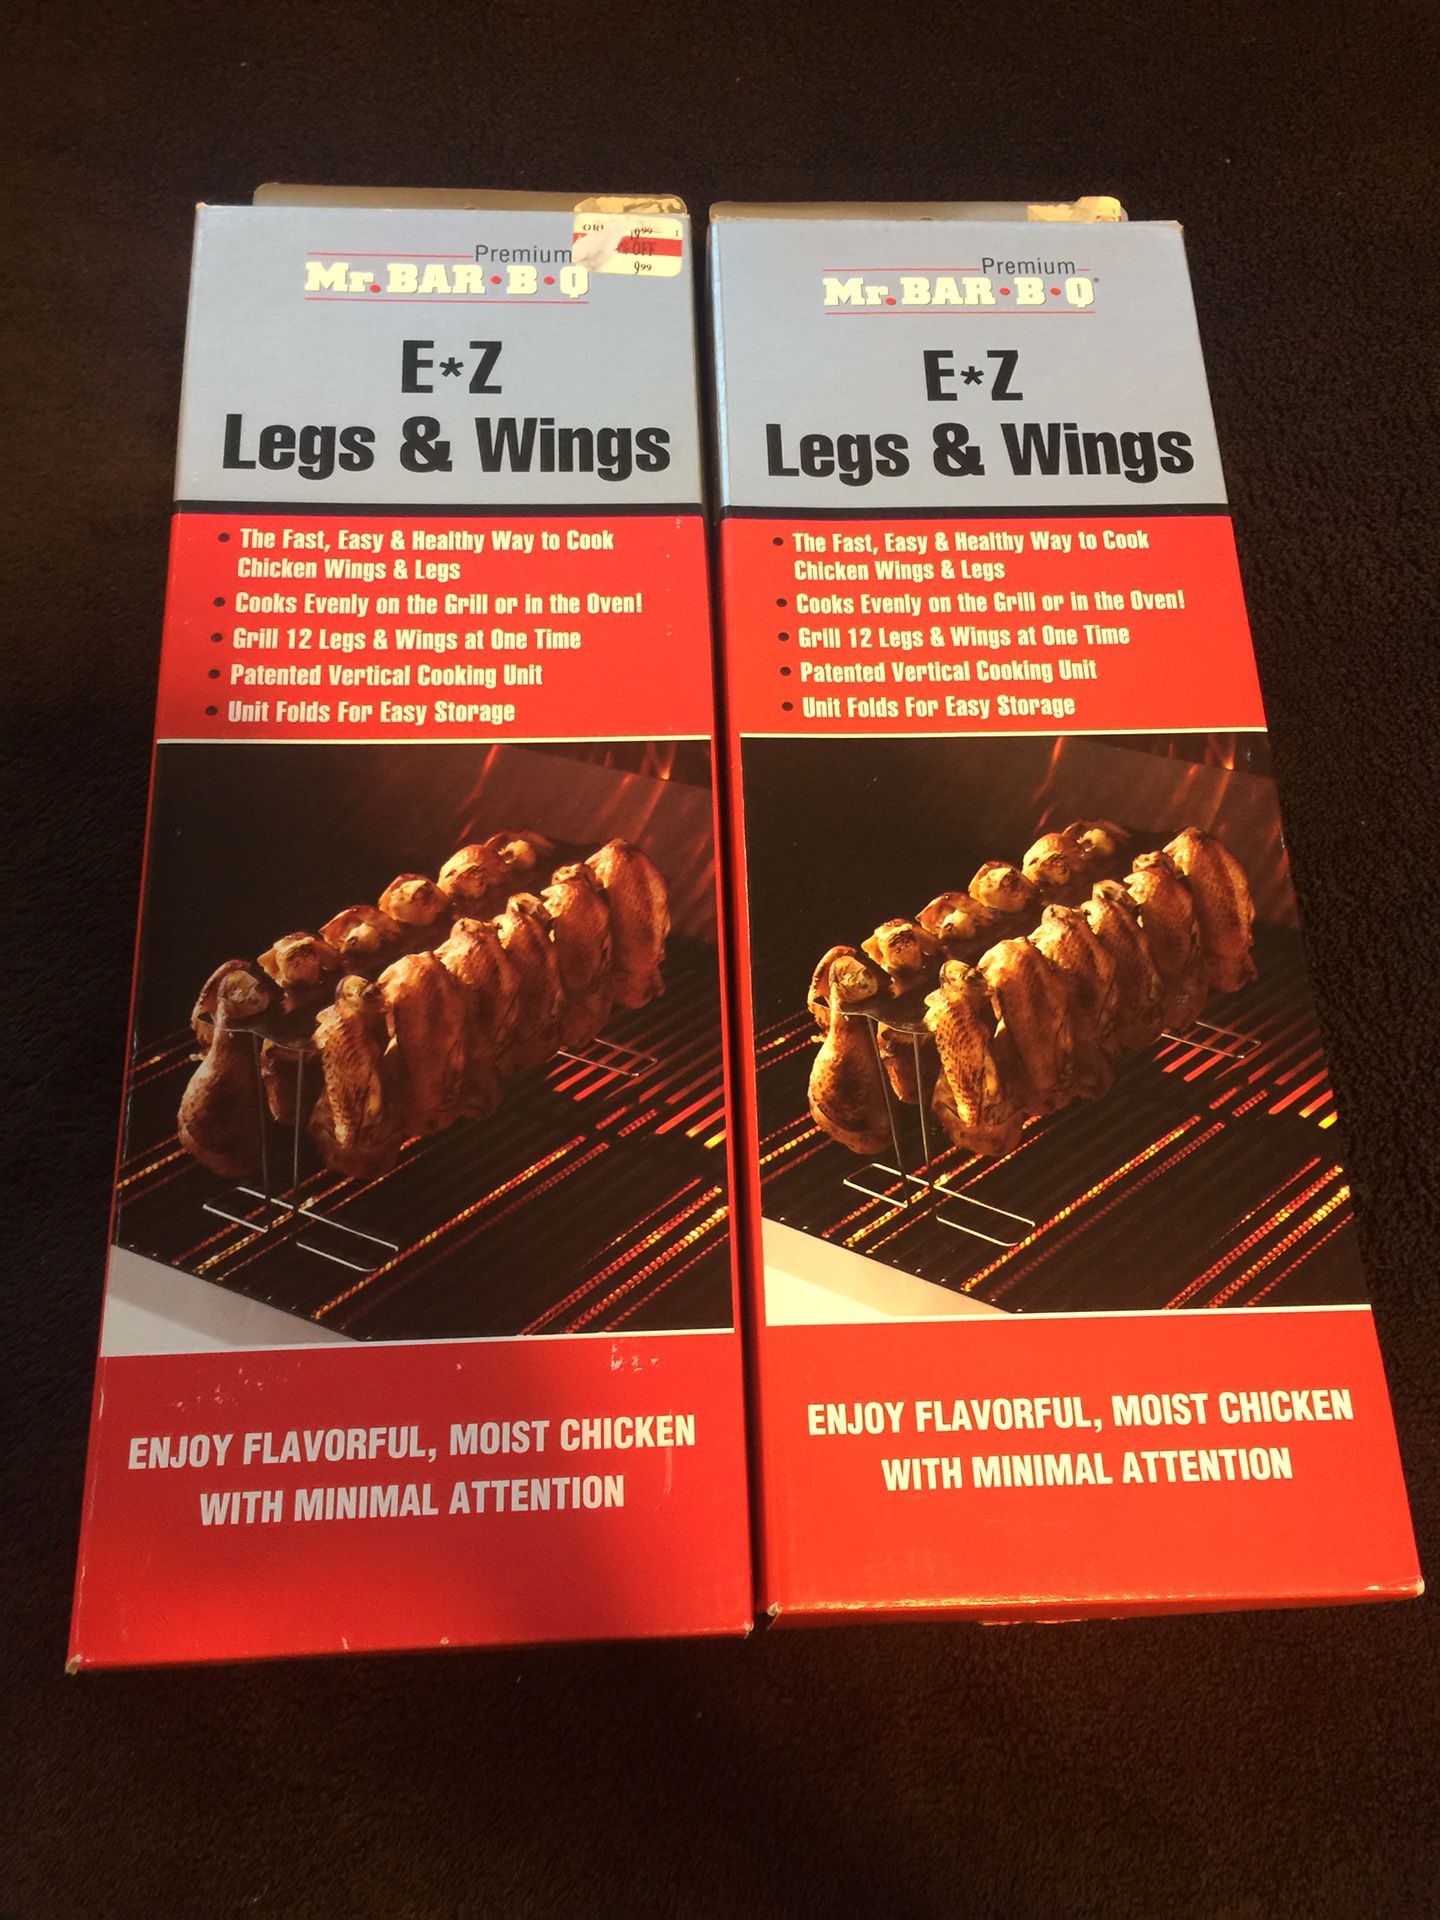 BBQ legs and wings grill